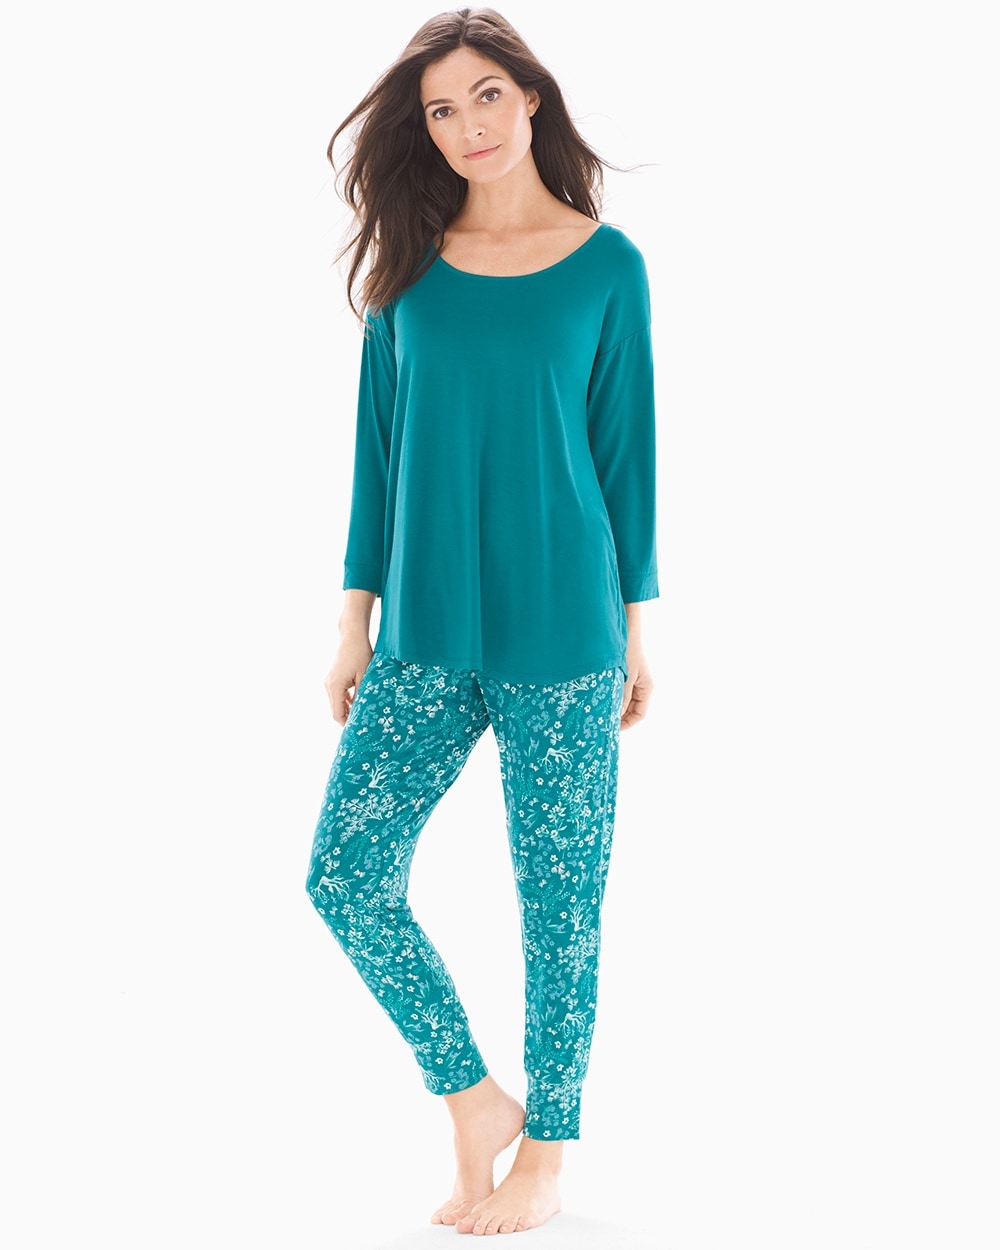 Cool Nights Relaxed Fit Pajama Set Garden Gem Green